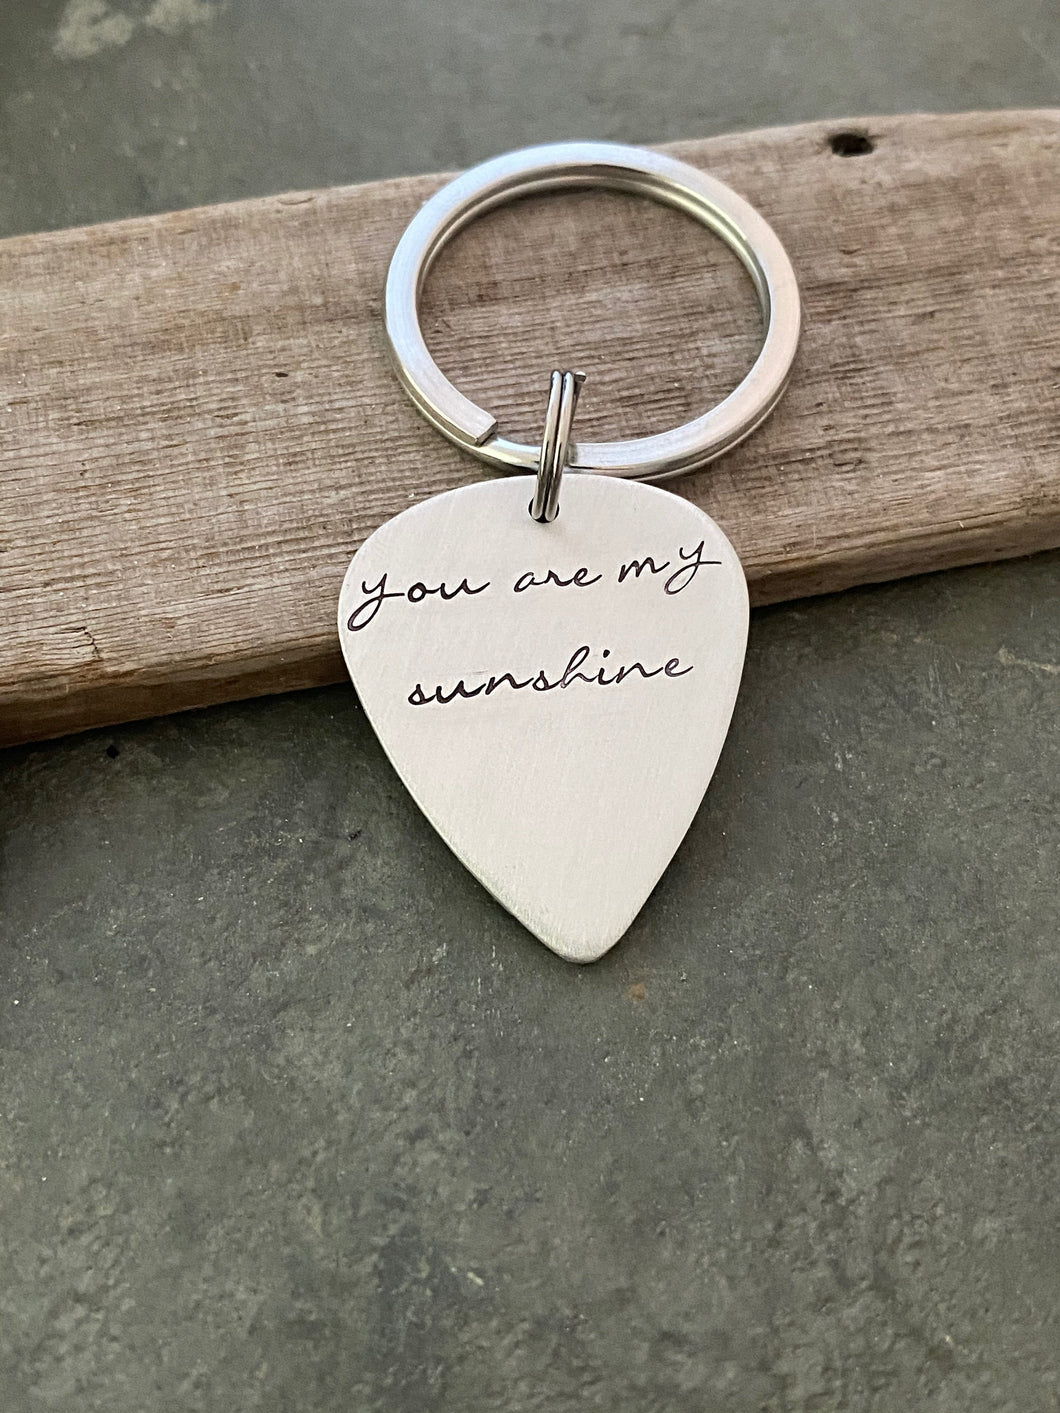 You are my sunshine, Rustic Guitar Pick keychain, Hand Stamped Copper Guitar Pick, 18g, Gift for him, or Musician, music lover